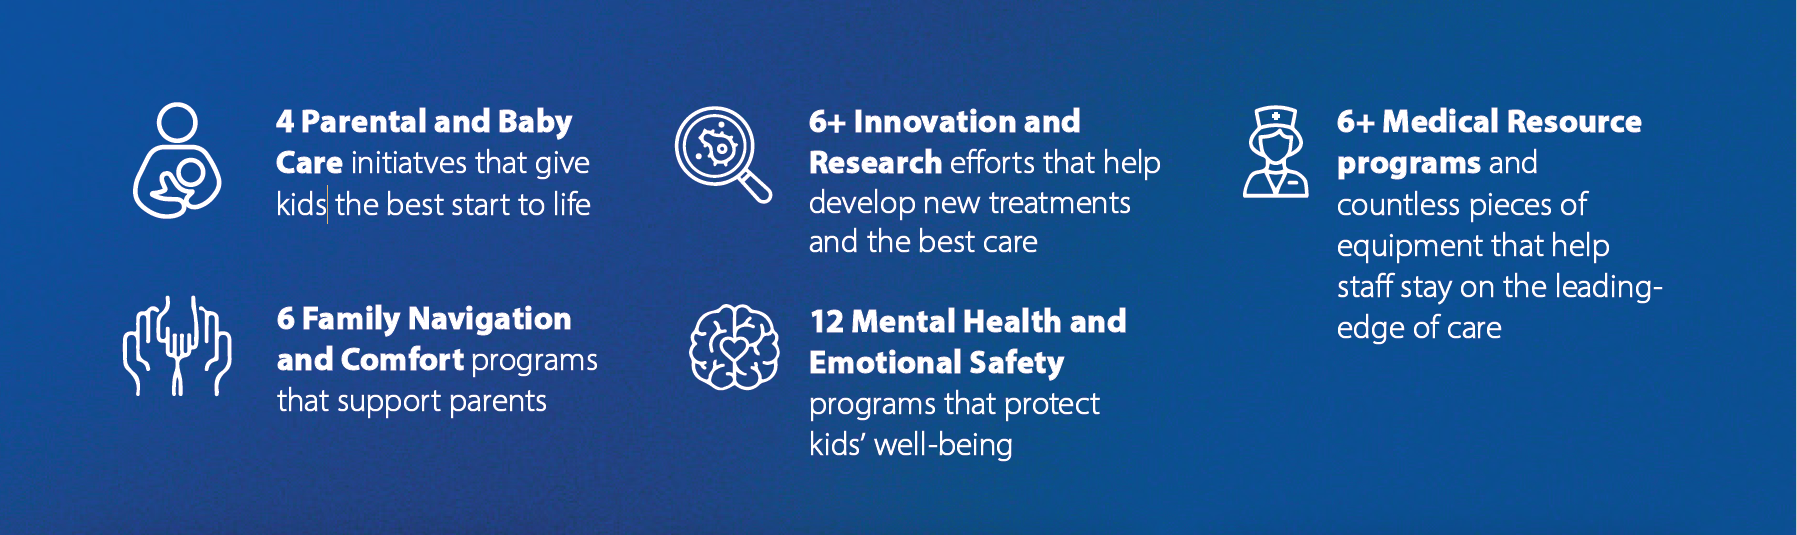 4 Parental and Baby Care Initiaives, 6+ Innovation and Research Efforts, 6+ Medical Resoure Programs, 6 Family Navigation and Comfort Programs, 12 Mental Health and Emotional Safety Programs 